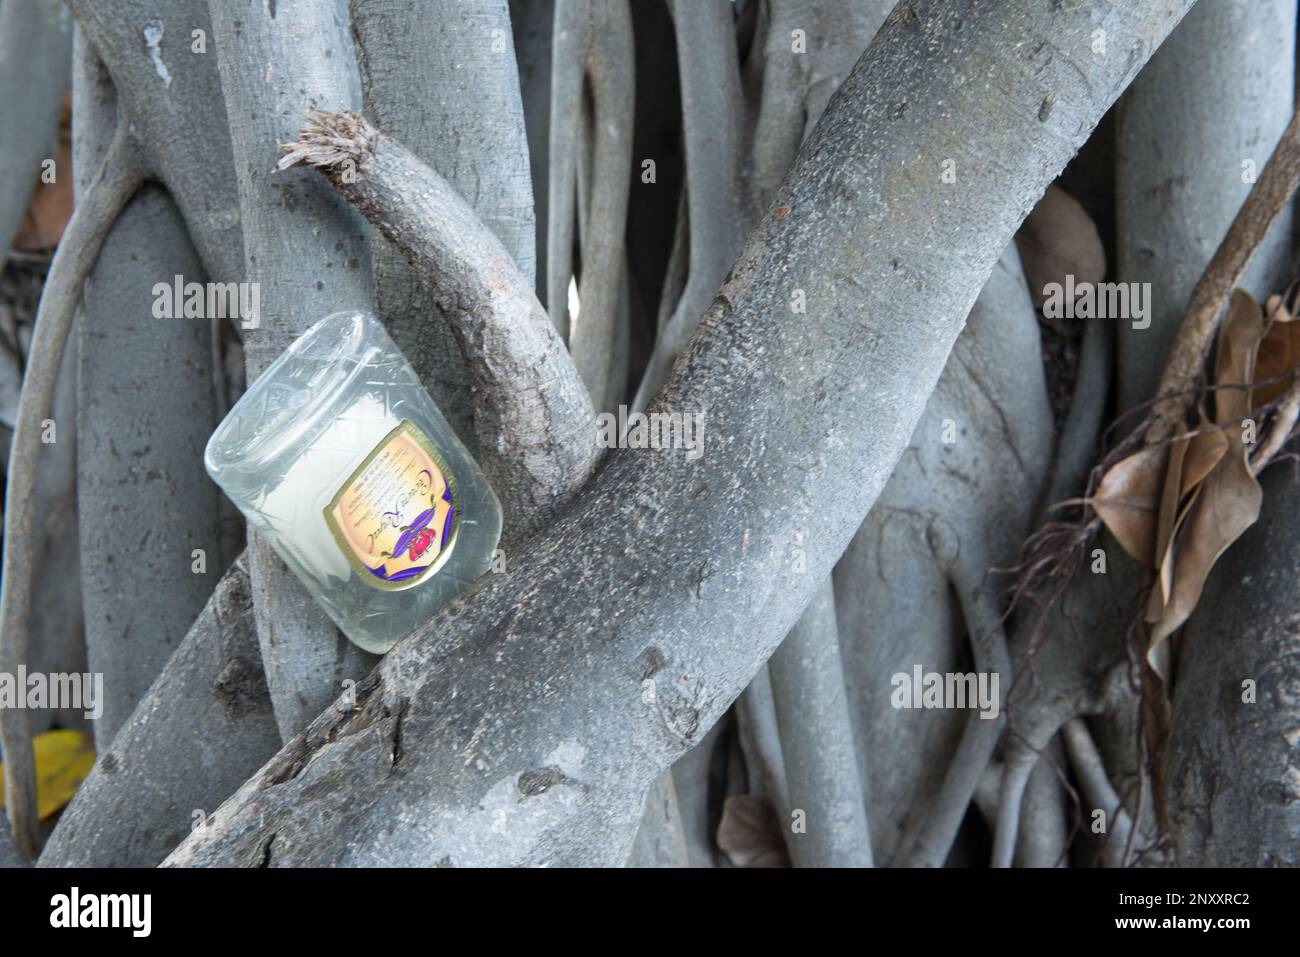 A rum bottle thoughtlessly stashed in the roots of a venerable banyan tree in Kapioiani Park, Honolulu, Oahu, Hawaii. Stock Photo